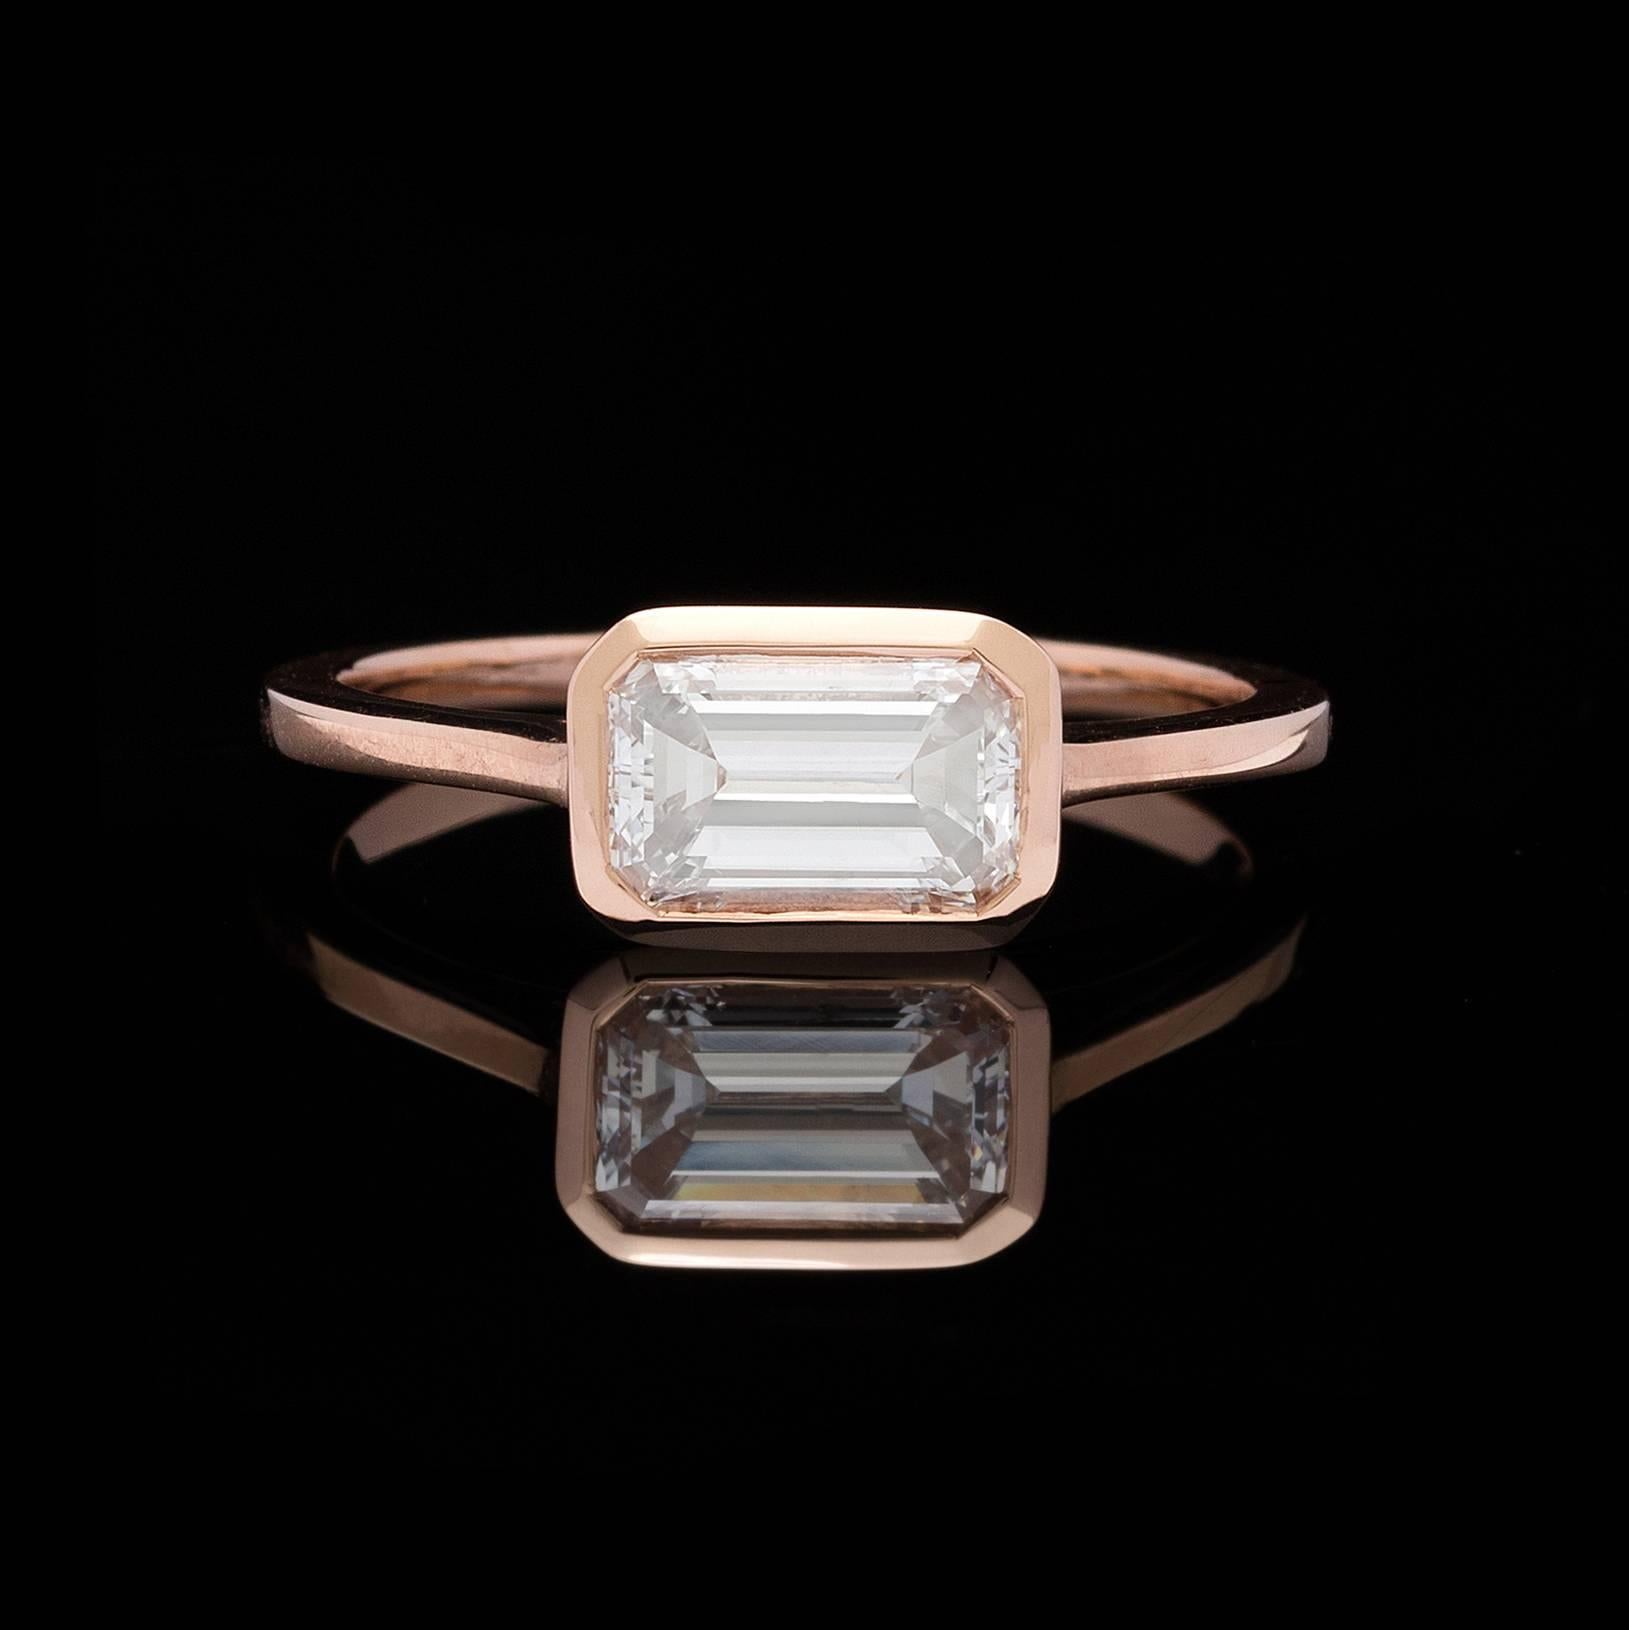 This contemporary, horizontally-set 1.02 carat emerald-cut diamond is set in 18k rose gold. Currently the ring is size 6 1/2, and can be adjusted up or down, weighs 2.2 grams, with a delicate band width of 1.3mm. This is a modern yet classic design.